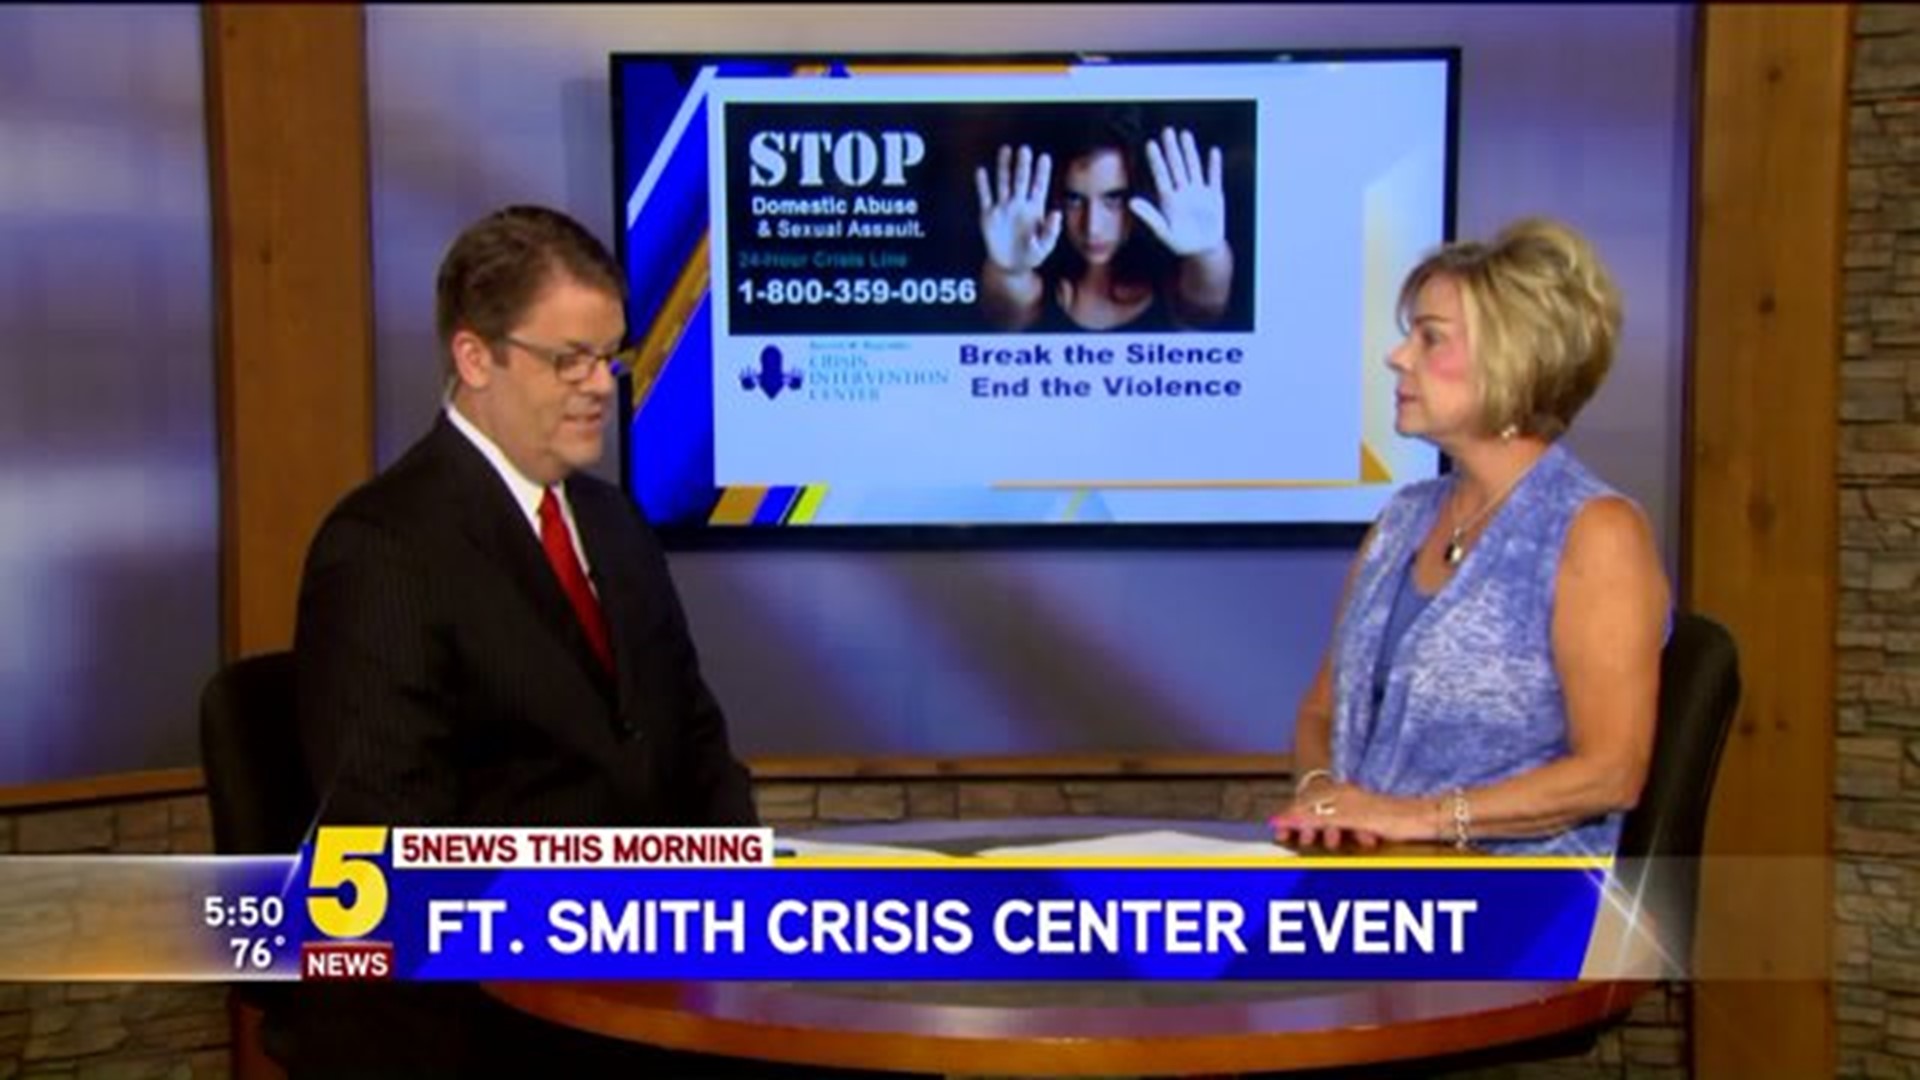 FORT SMITH CRISIS CENTER